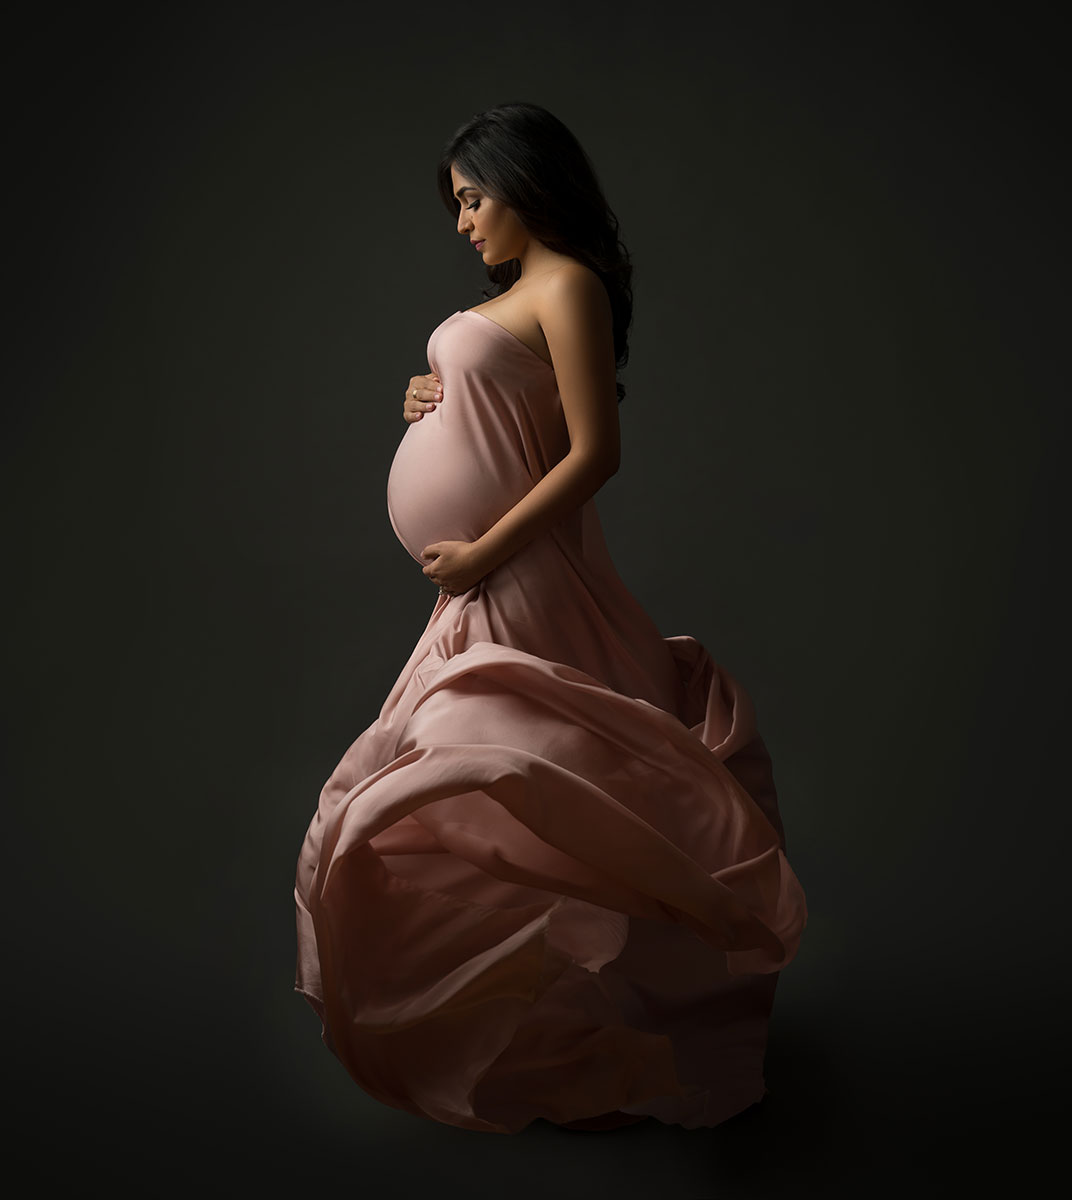 Pregnant woman wearing a flowing pink dress and posing for a portrait